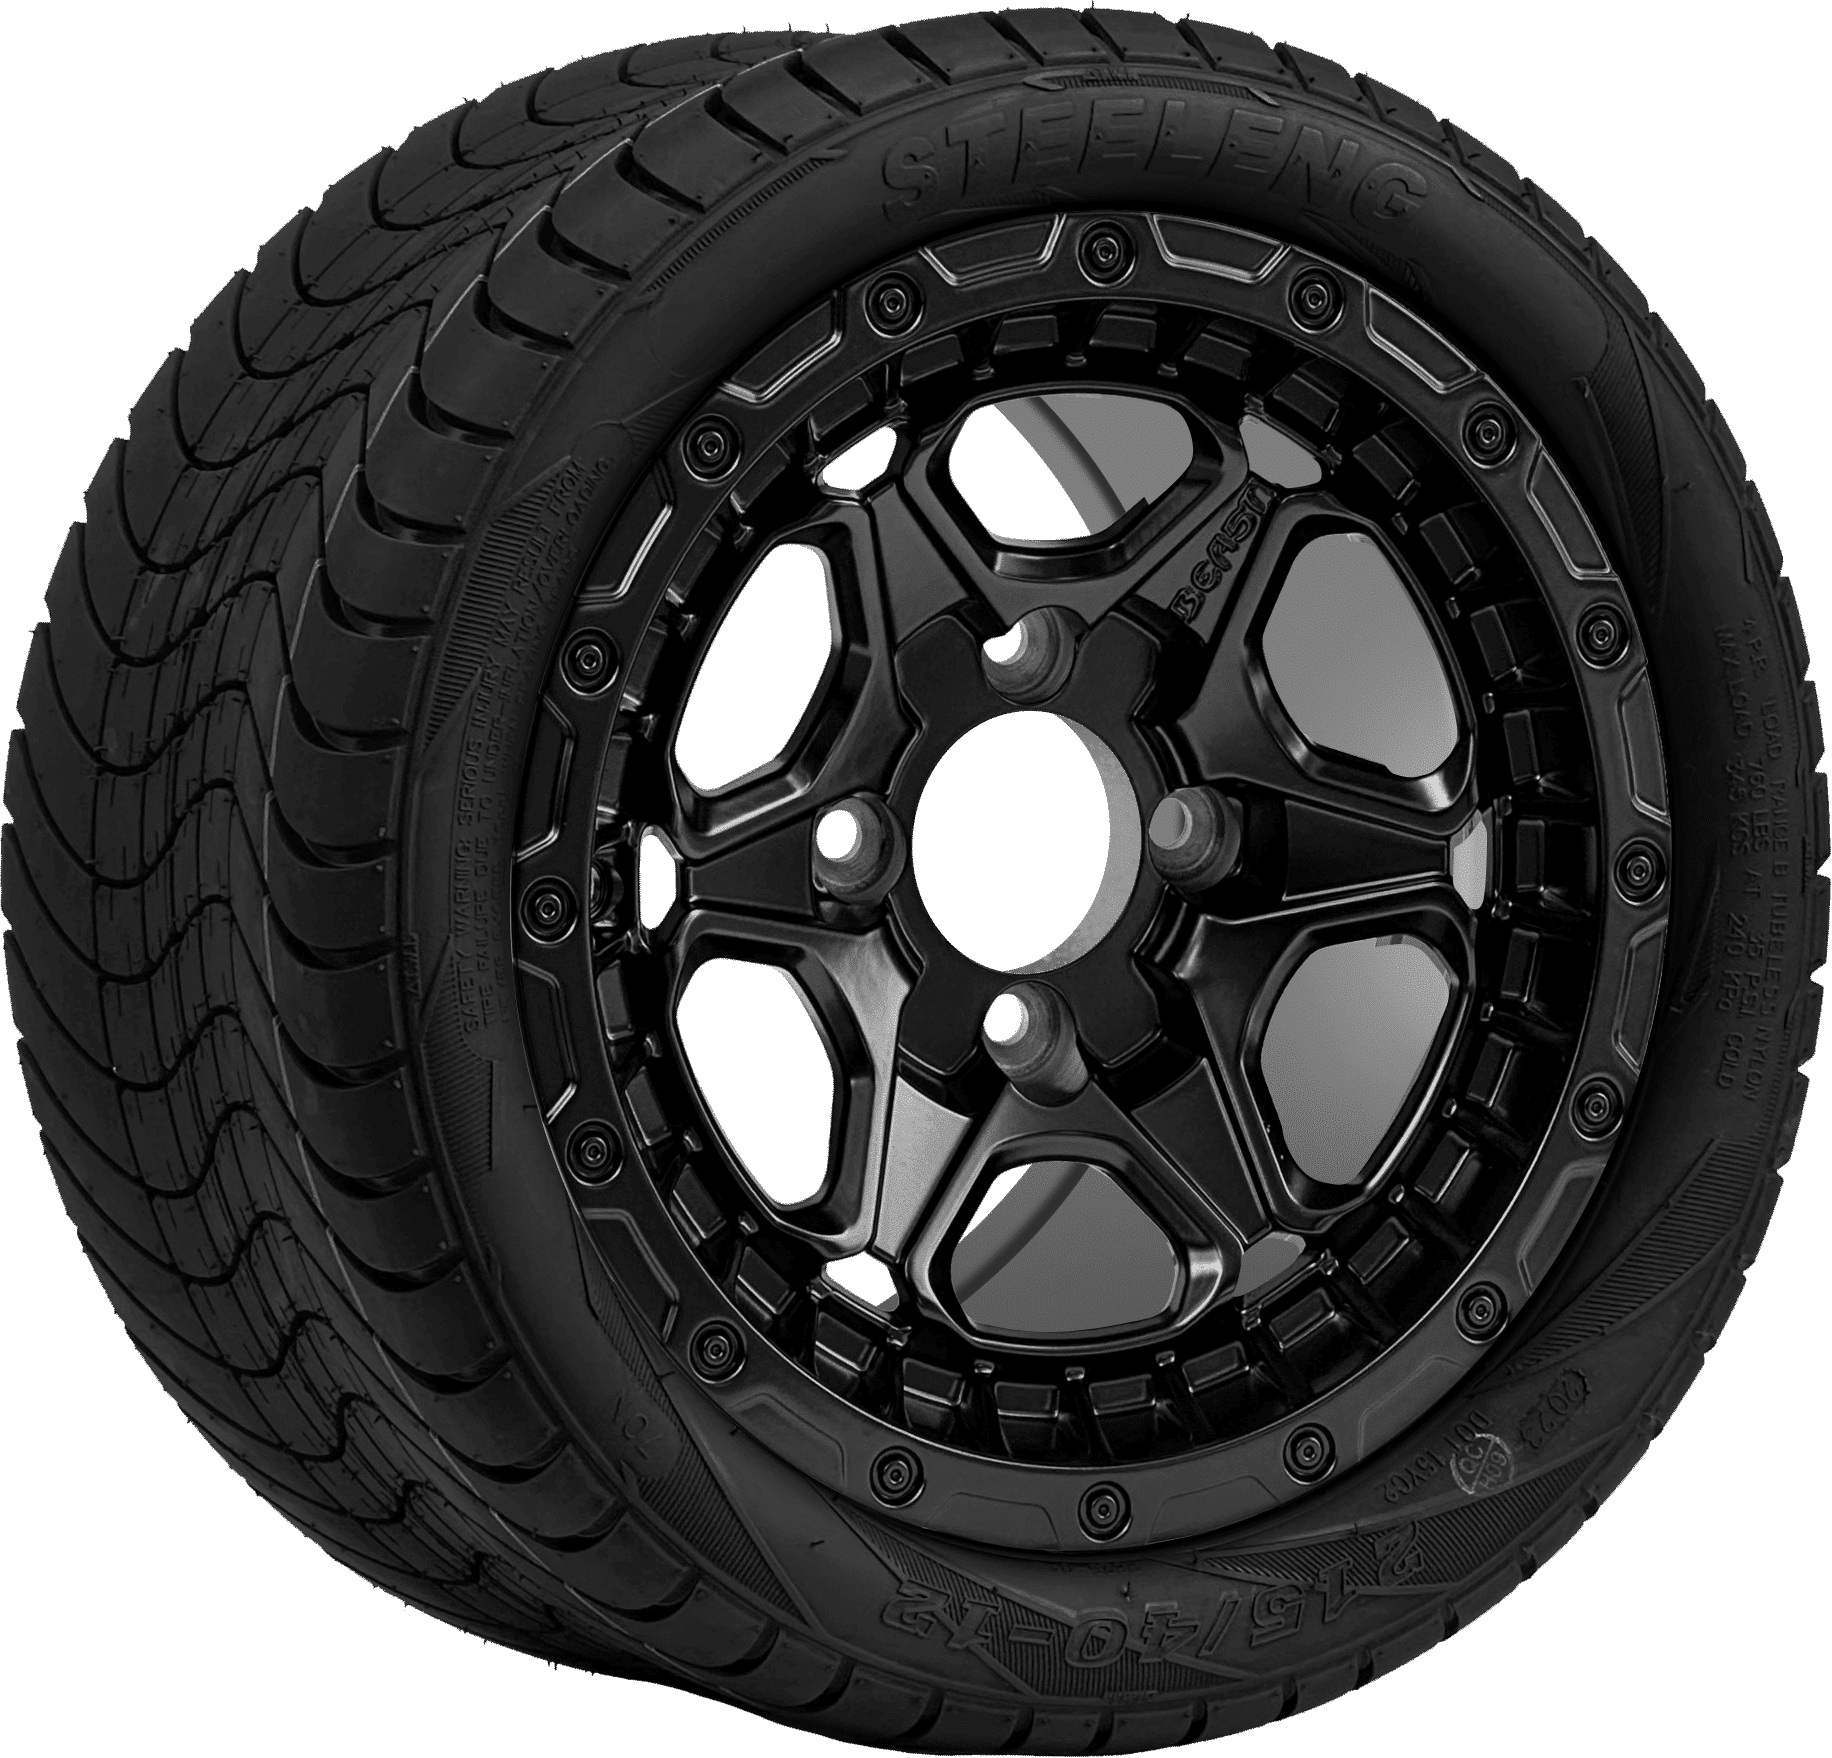 BNDL-TR1211-WH1265-CC0024-LN0006 12″ GRIZZLY MATTE BLACK WHEEL – ALUMINUM ALLOY / STEELENG 215/40-12 LOW PROFILE TIRE DOT APPROVED